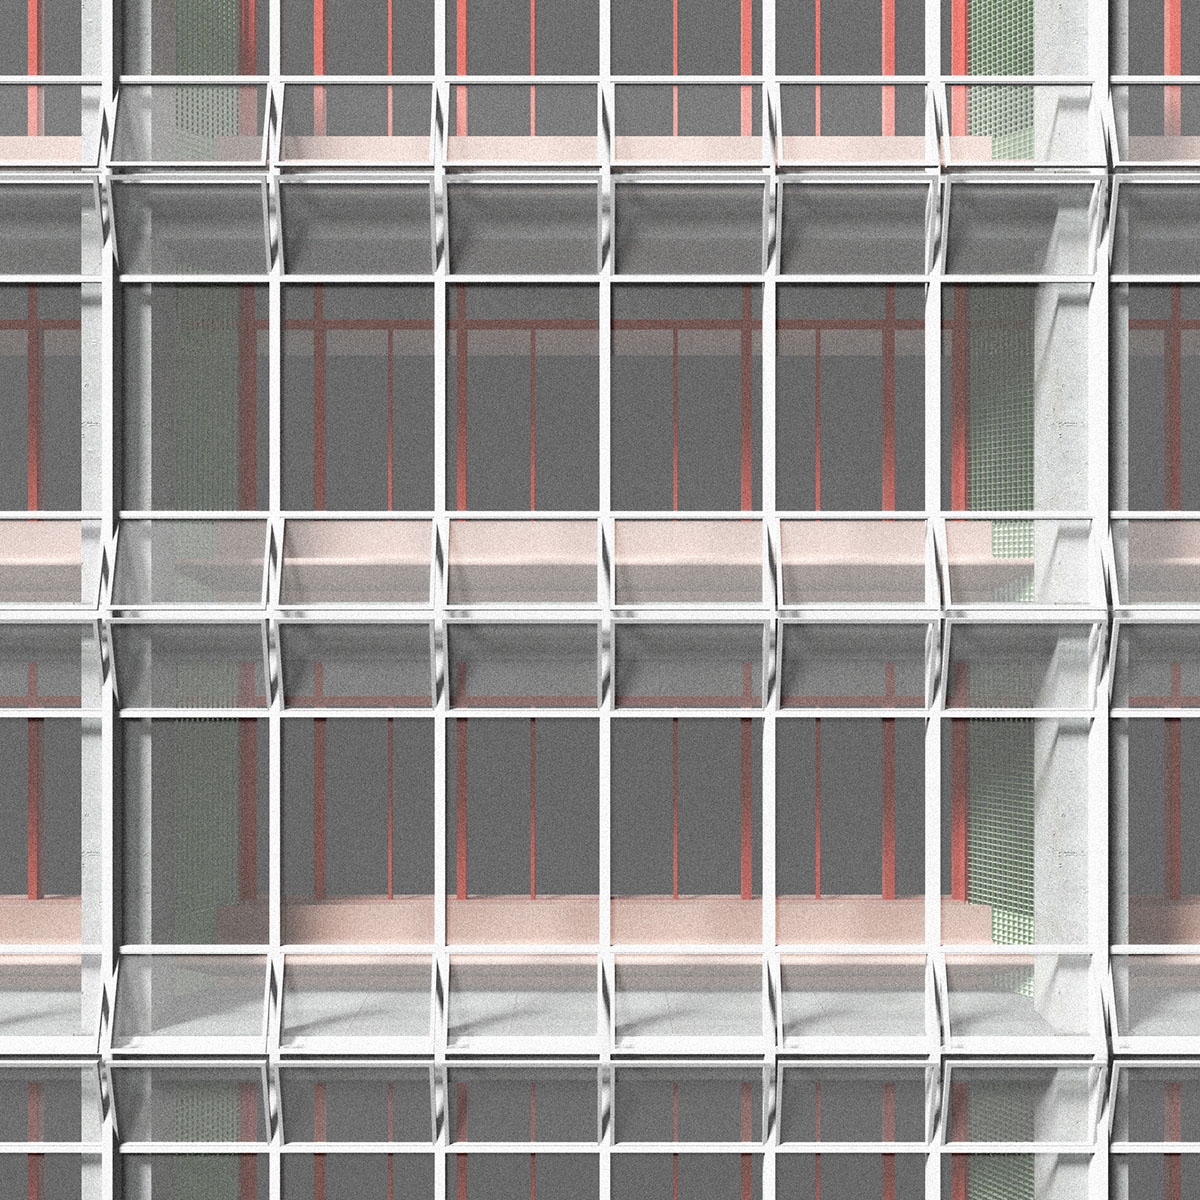 Up close rendering of glass facade with view of light pink and red details on the interior.